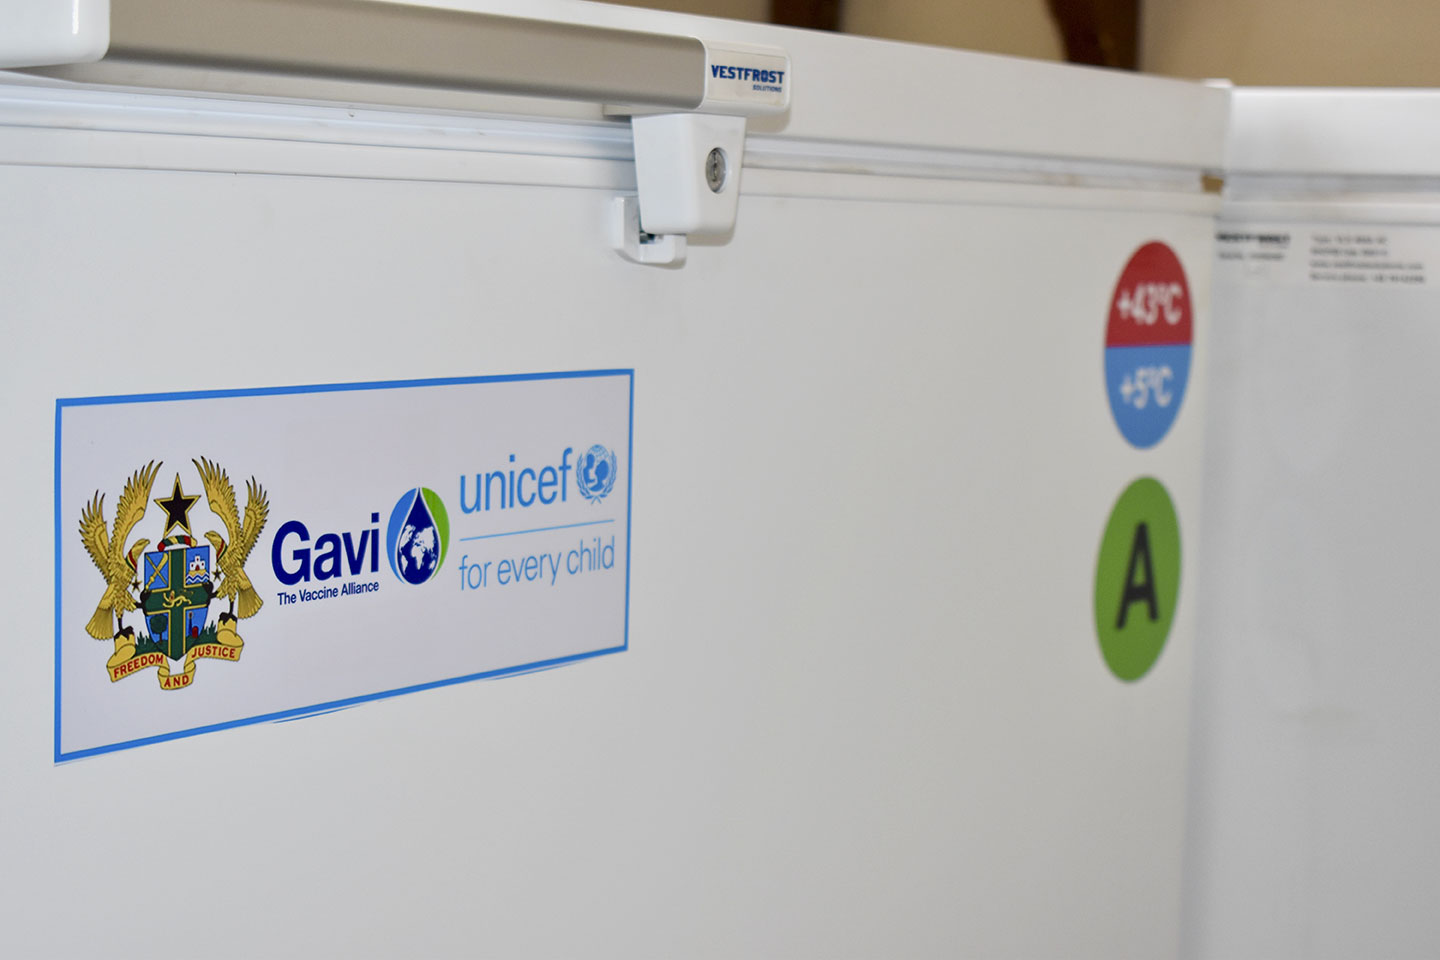 Vaccine fridges provided by Gavi in a health centre in Kumasi in the Ashanti Region on 12 September 2020. ©UNICEF/PAPPOE